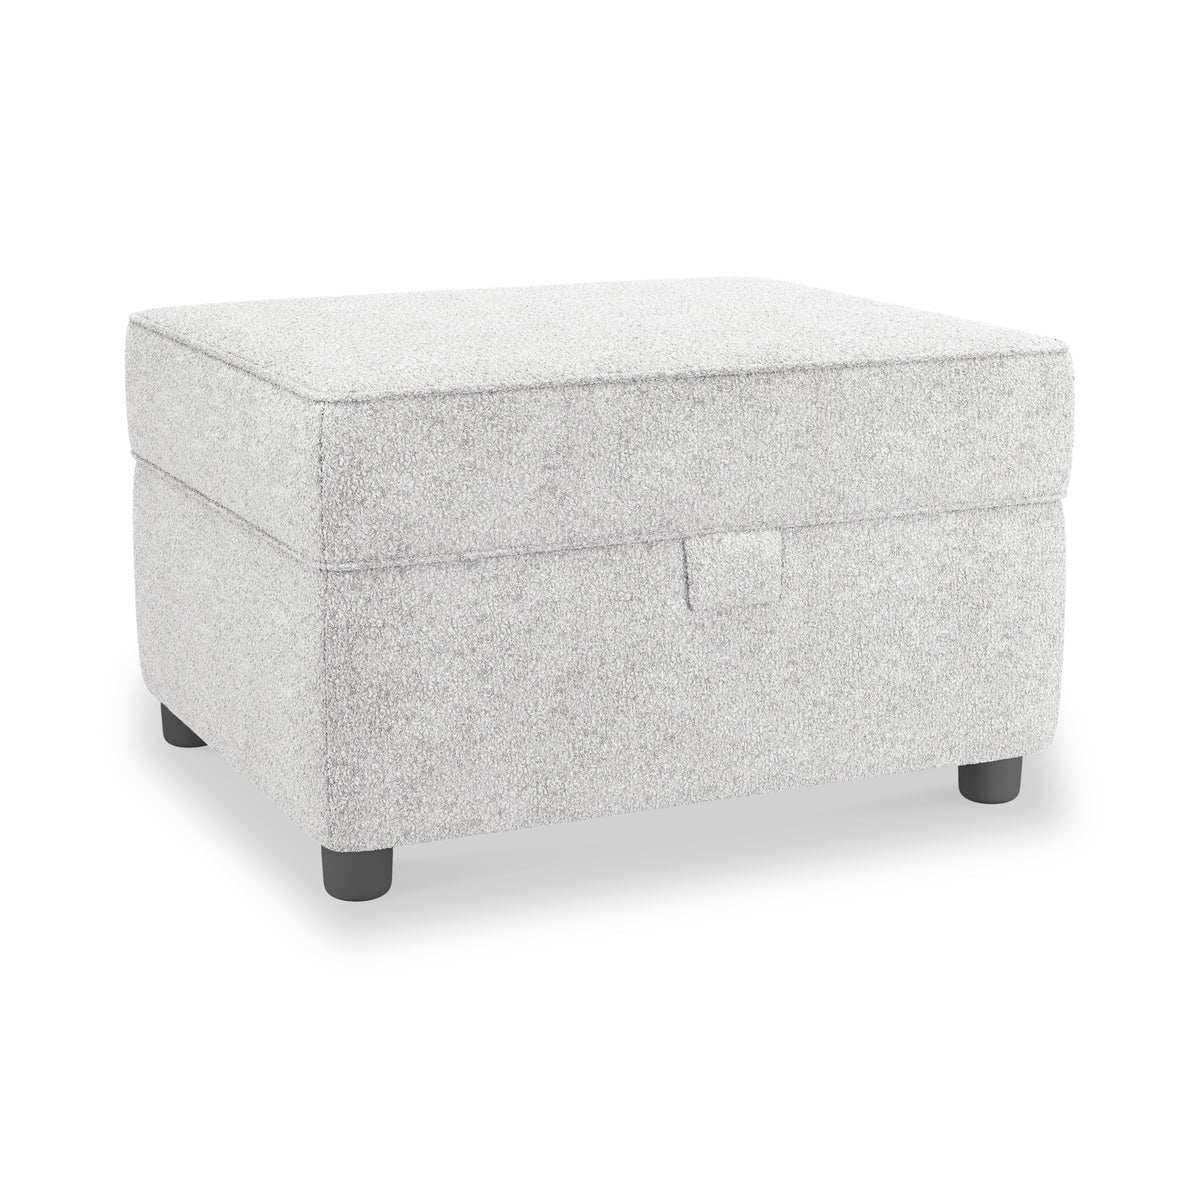 Jessie Ivory Small Storage Footstool from Roseland Furniture